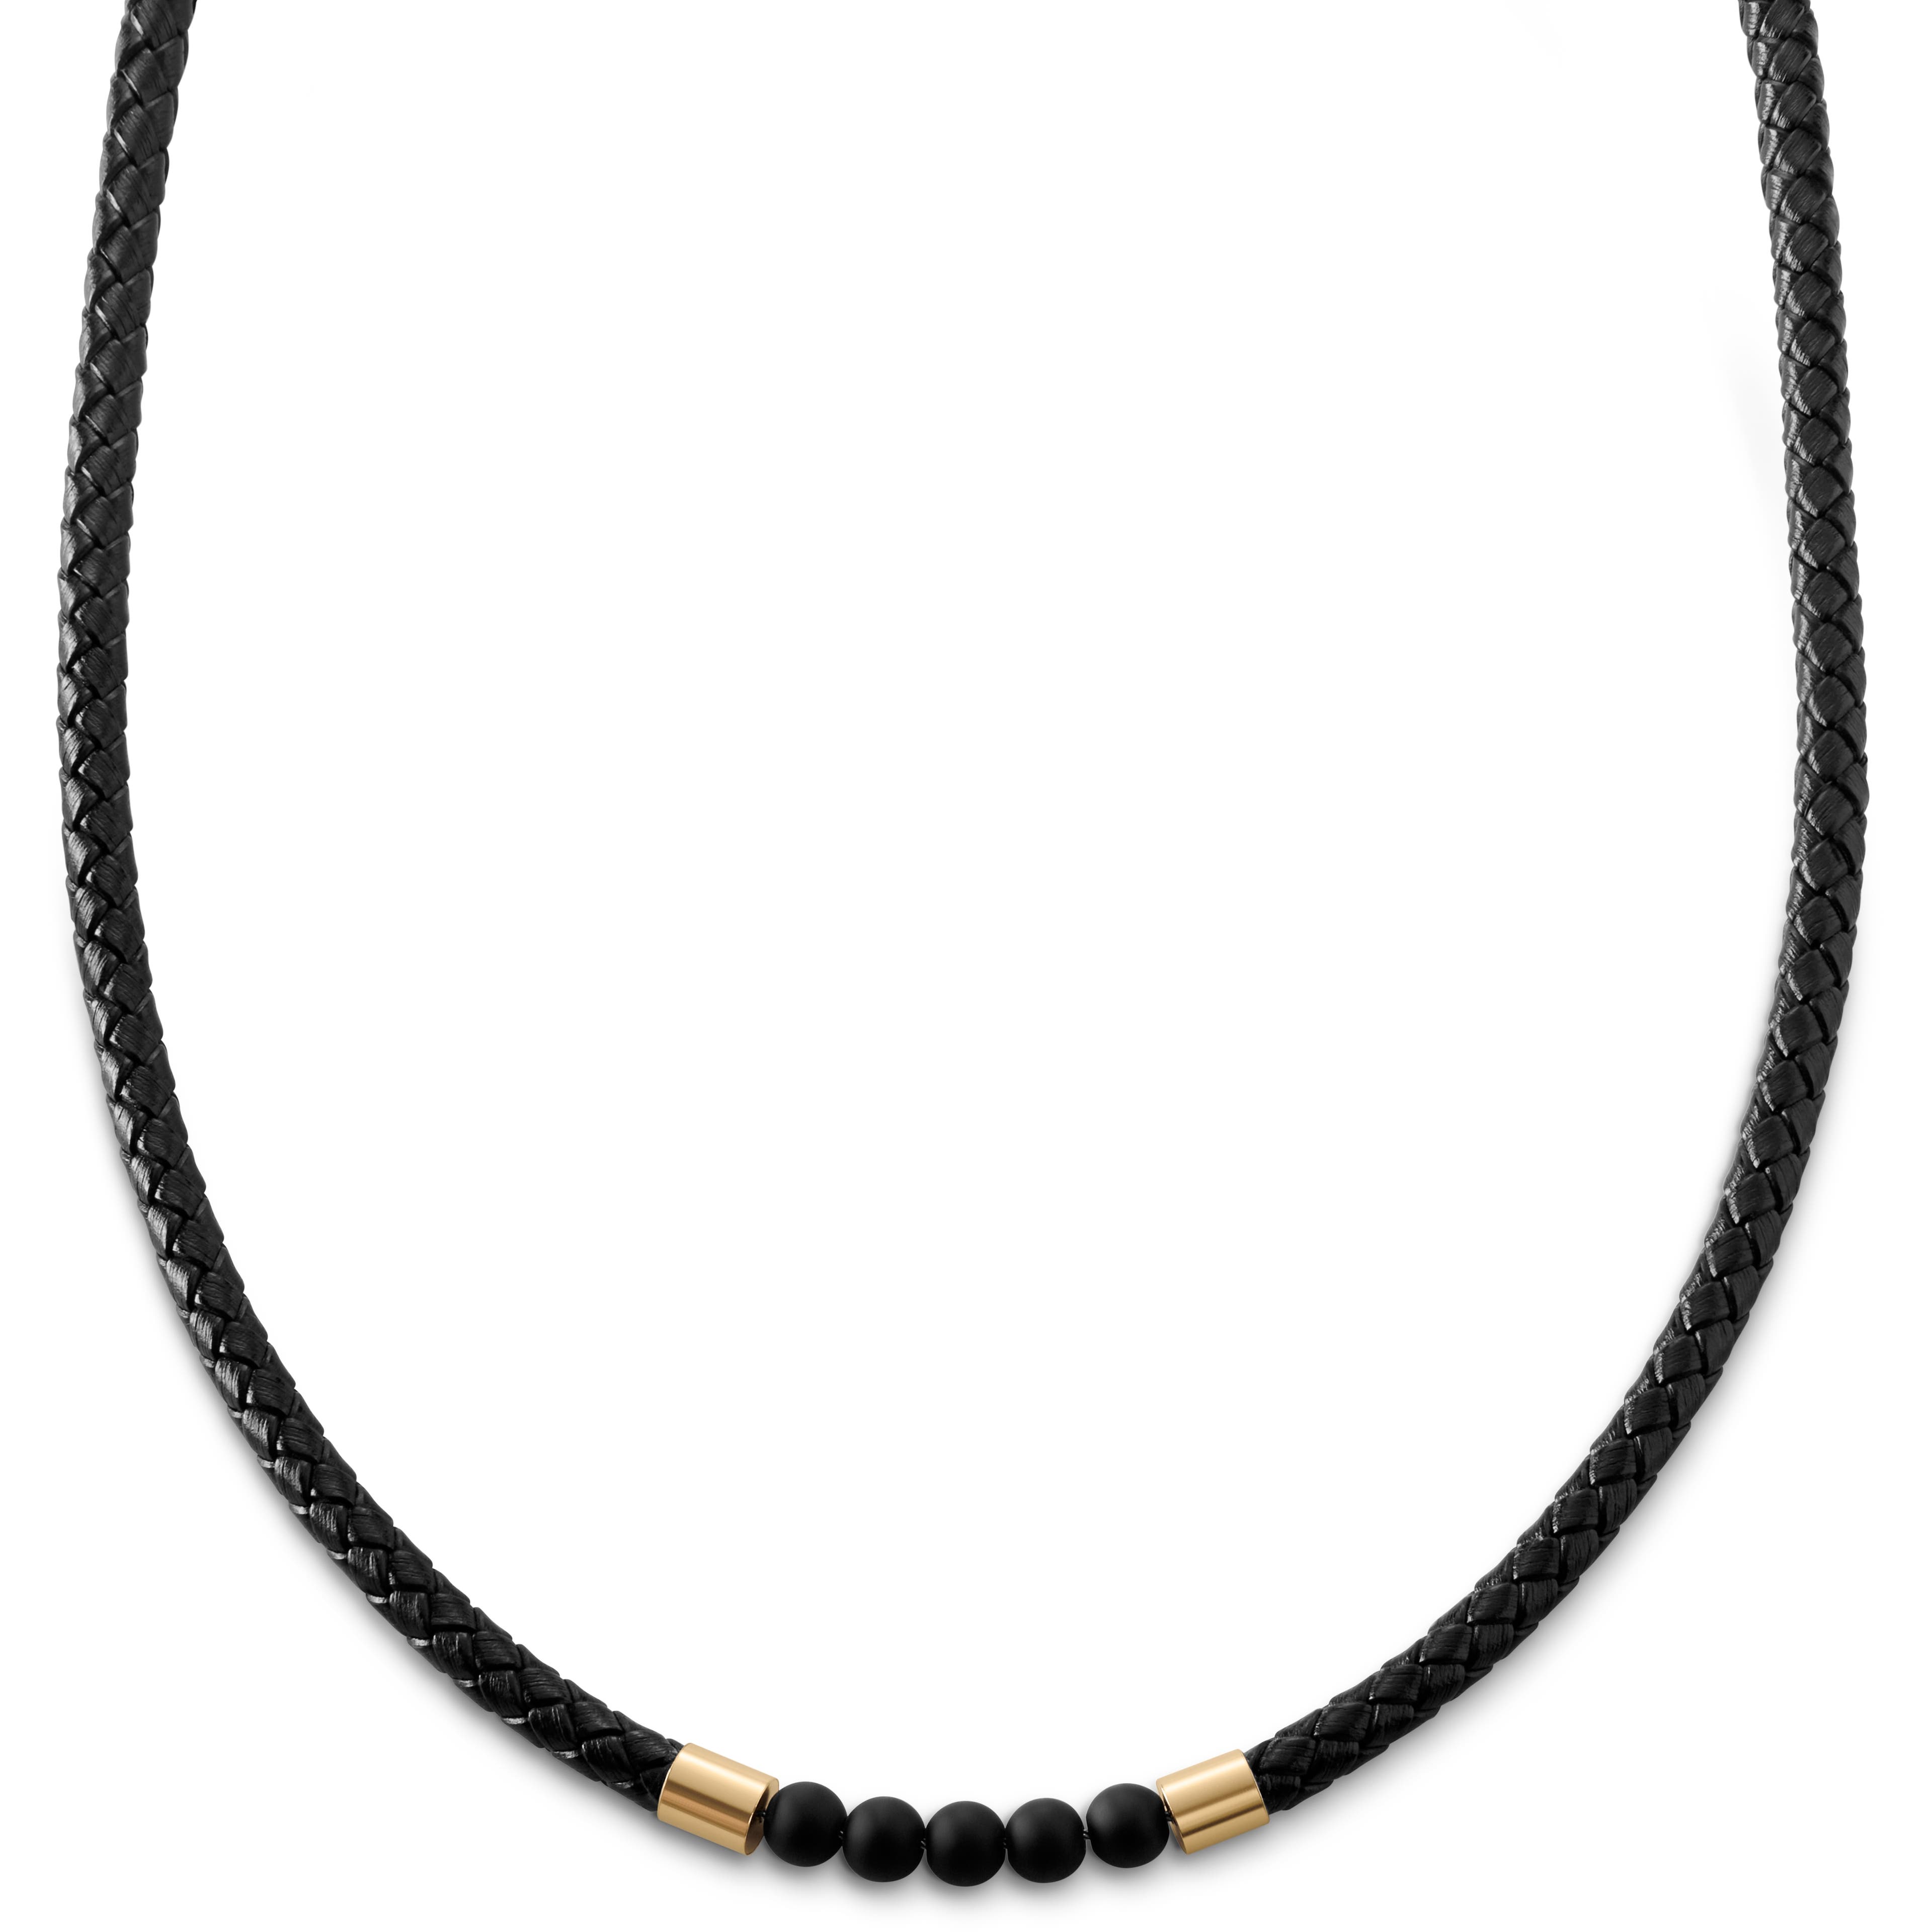 Tenvis, 1/5 (5 mm) Gold-tone Onyx Leather Necklace